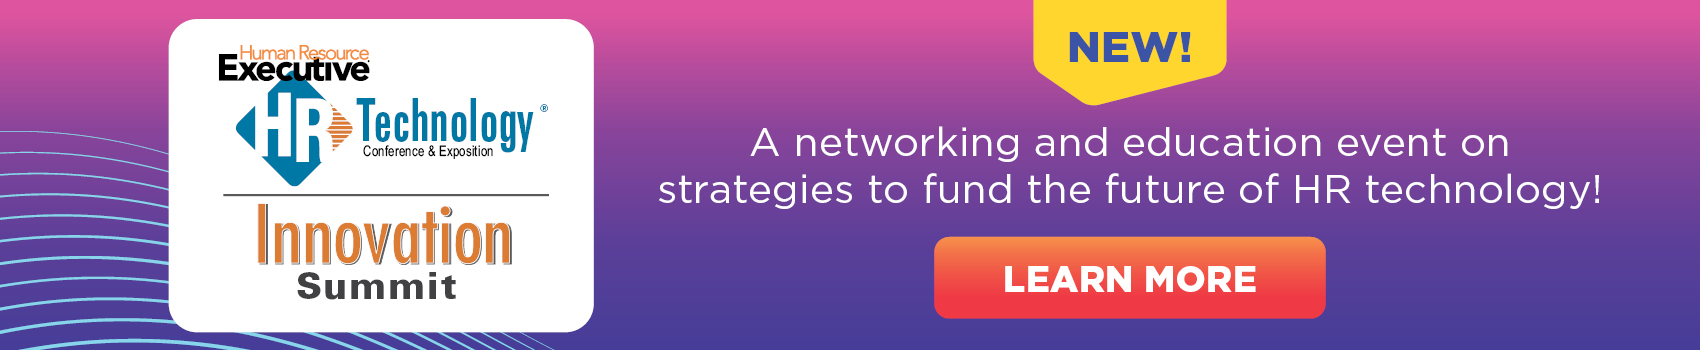  A networking and education event on strategies to fund the future of HR technology! 